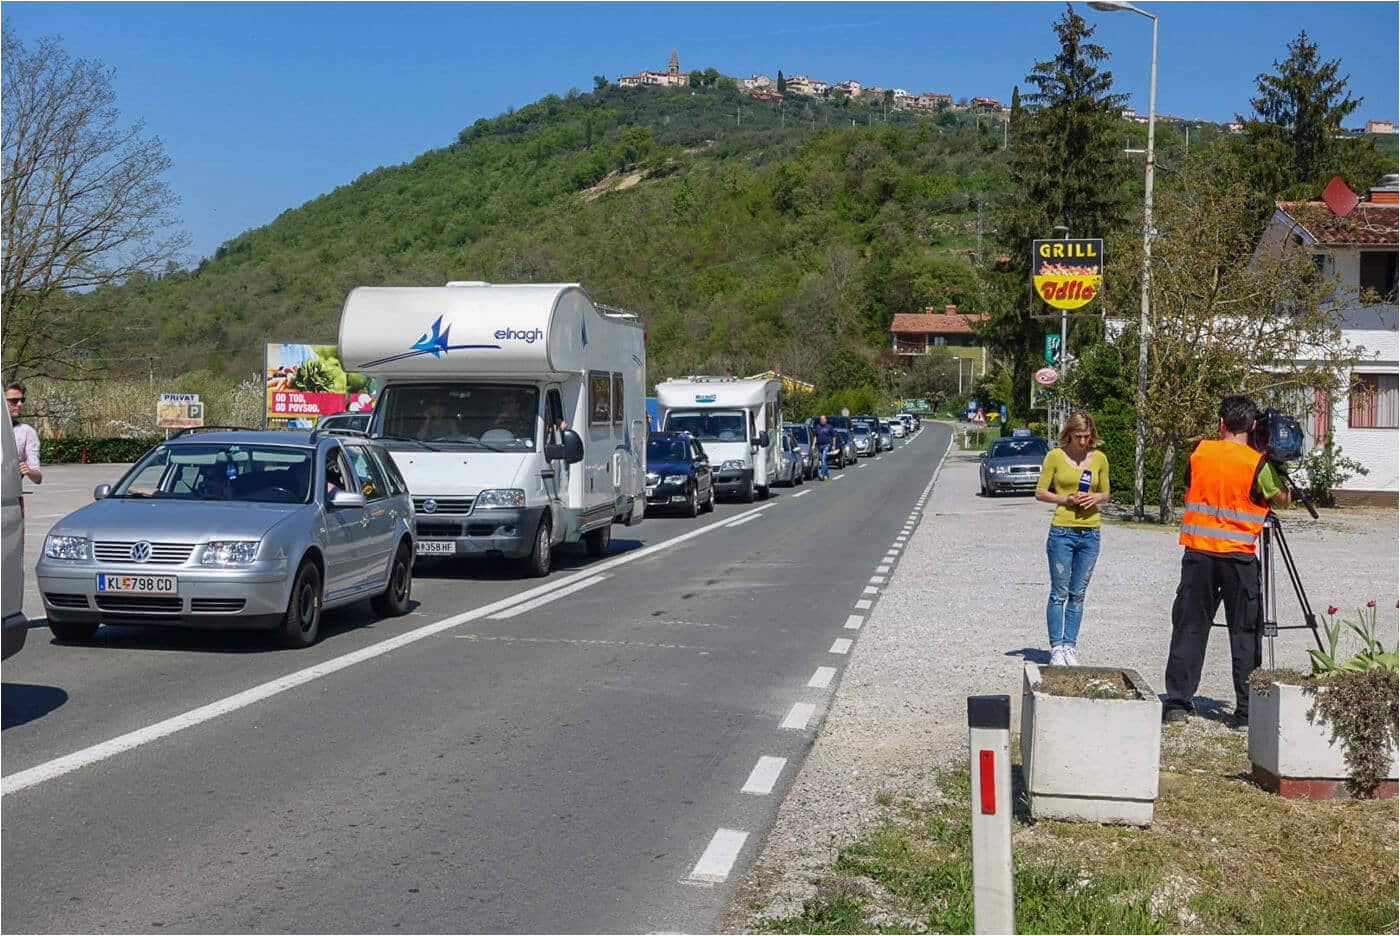 Border Crossing Card Time Limit Entering Croatia Traffic Jams and Waiting Times Should